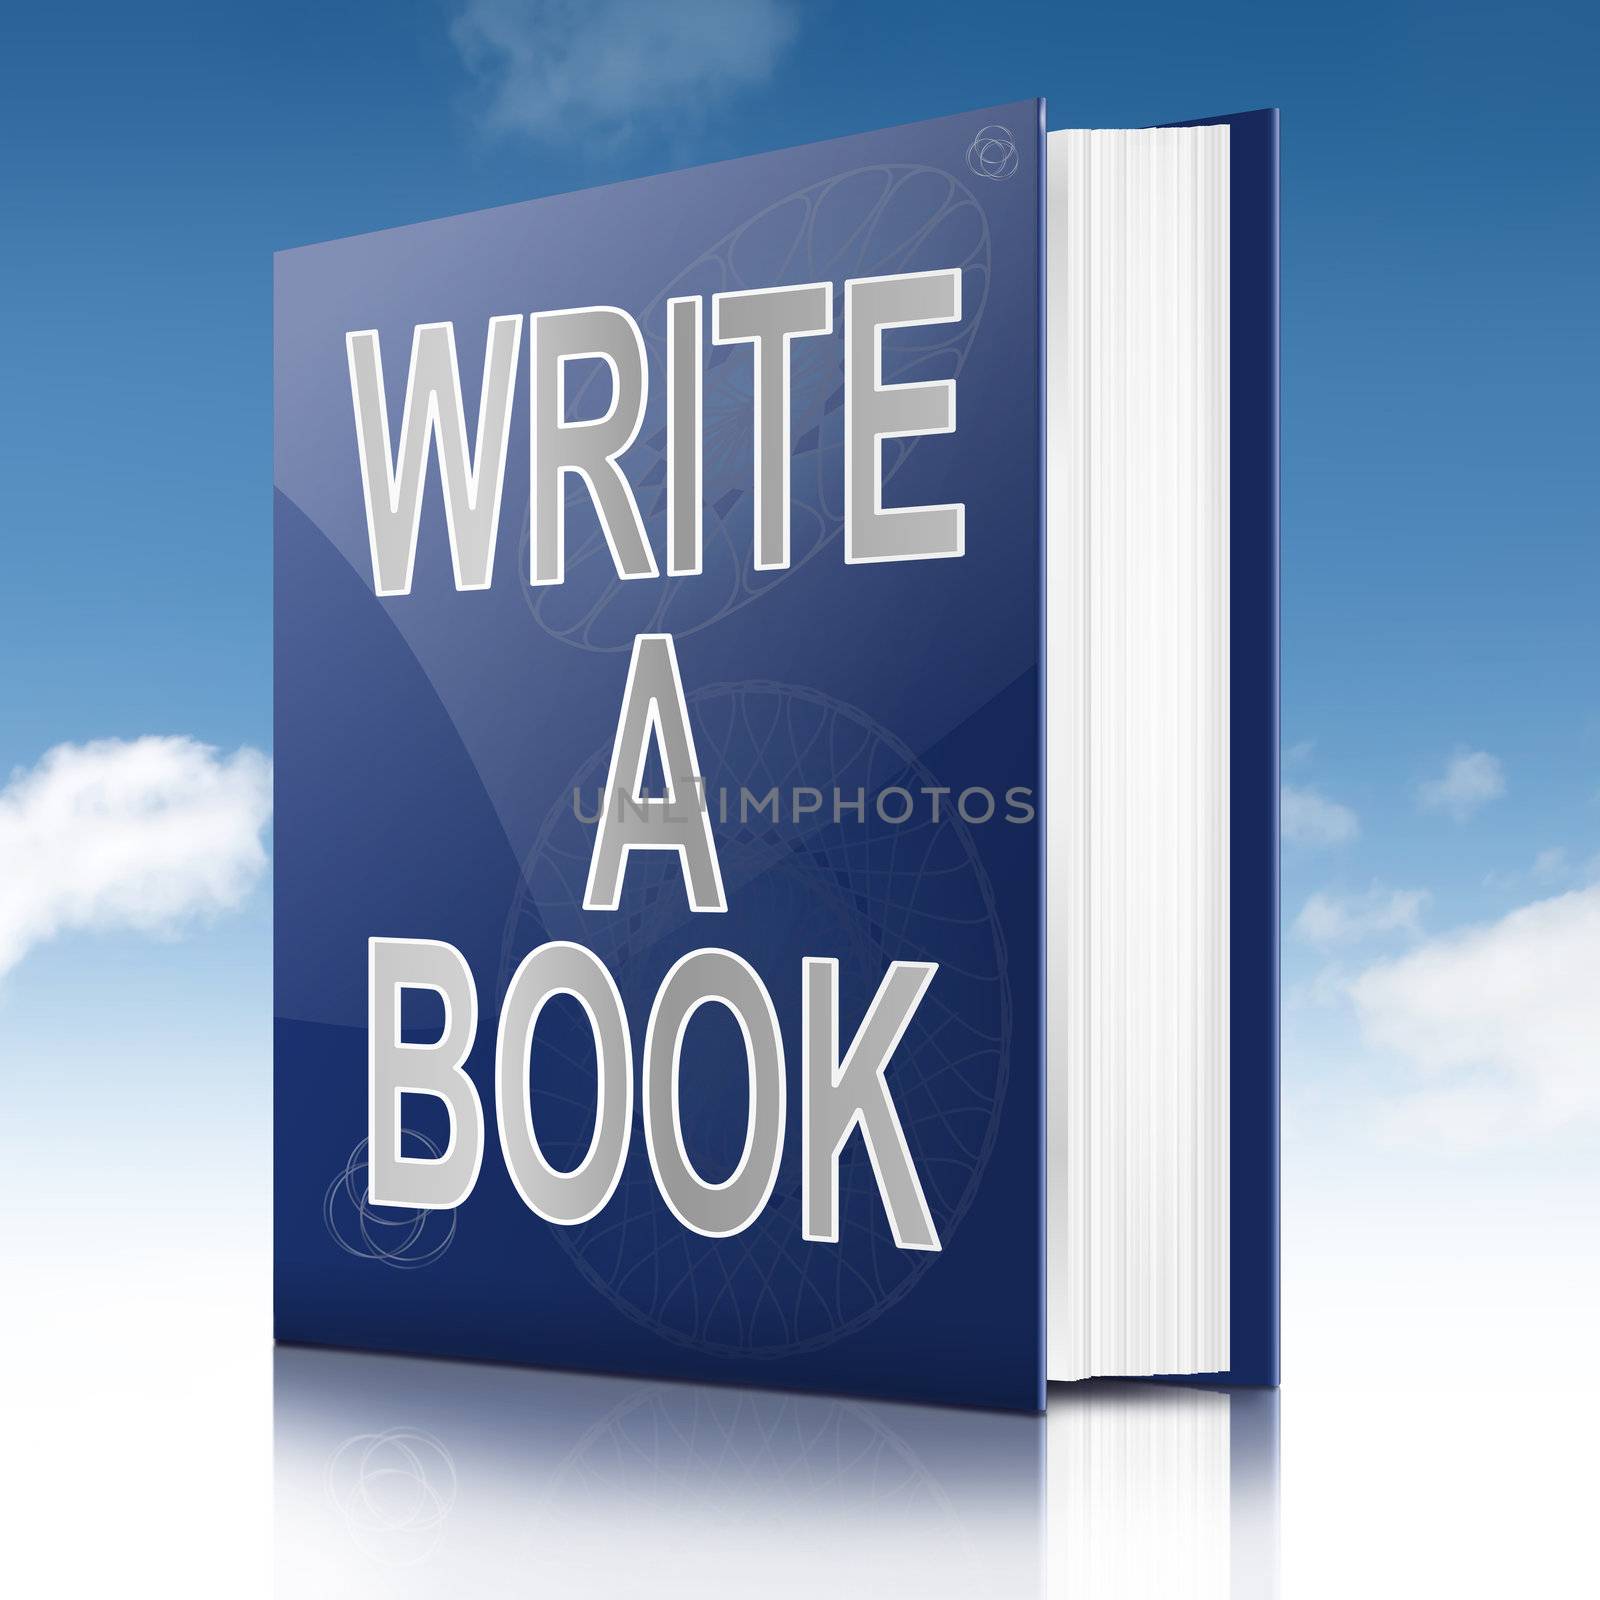 Illustration depicting a book with a writing a book concept title. Sky background.